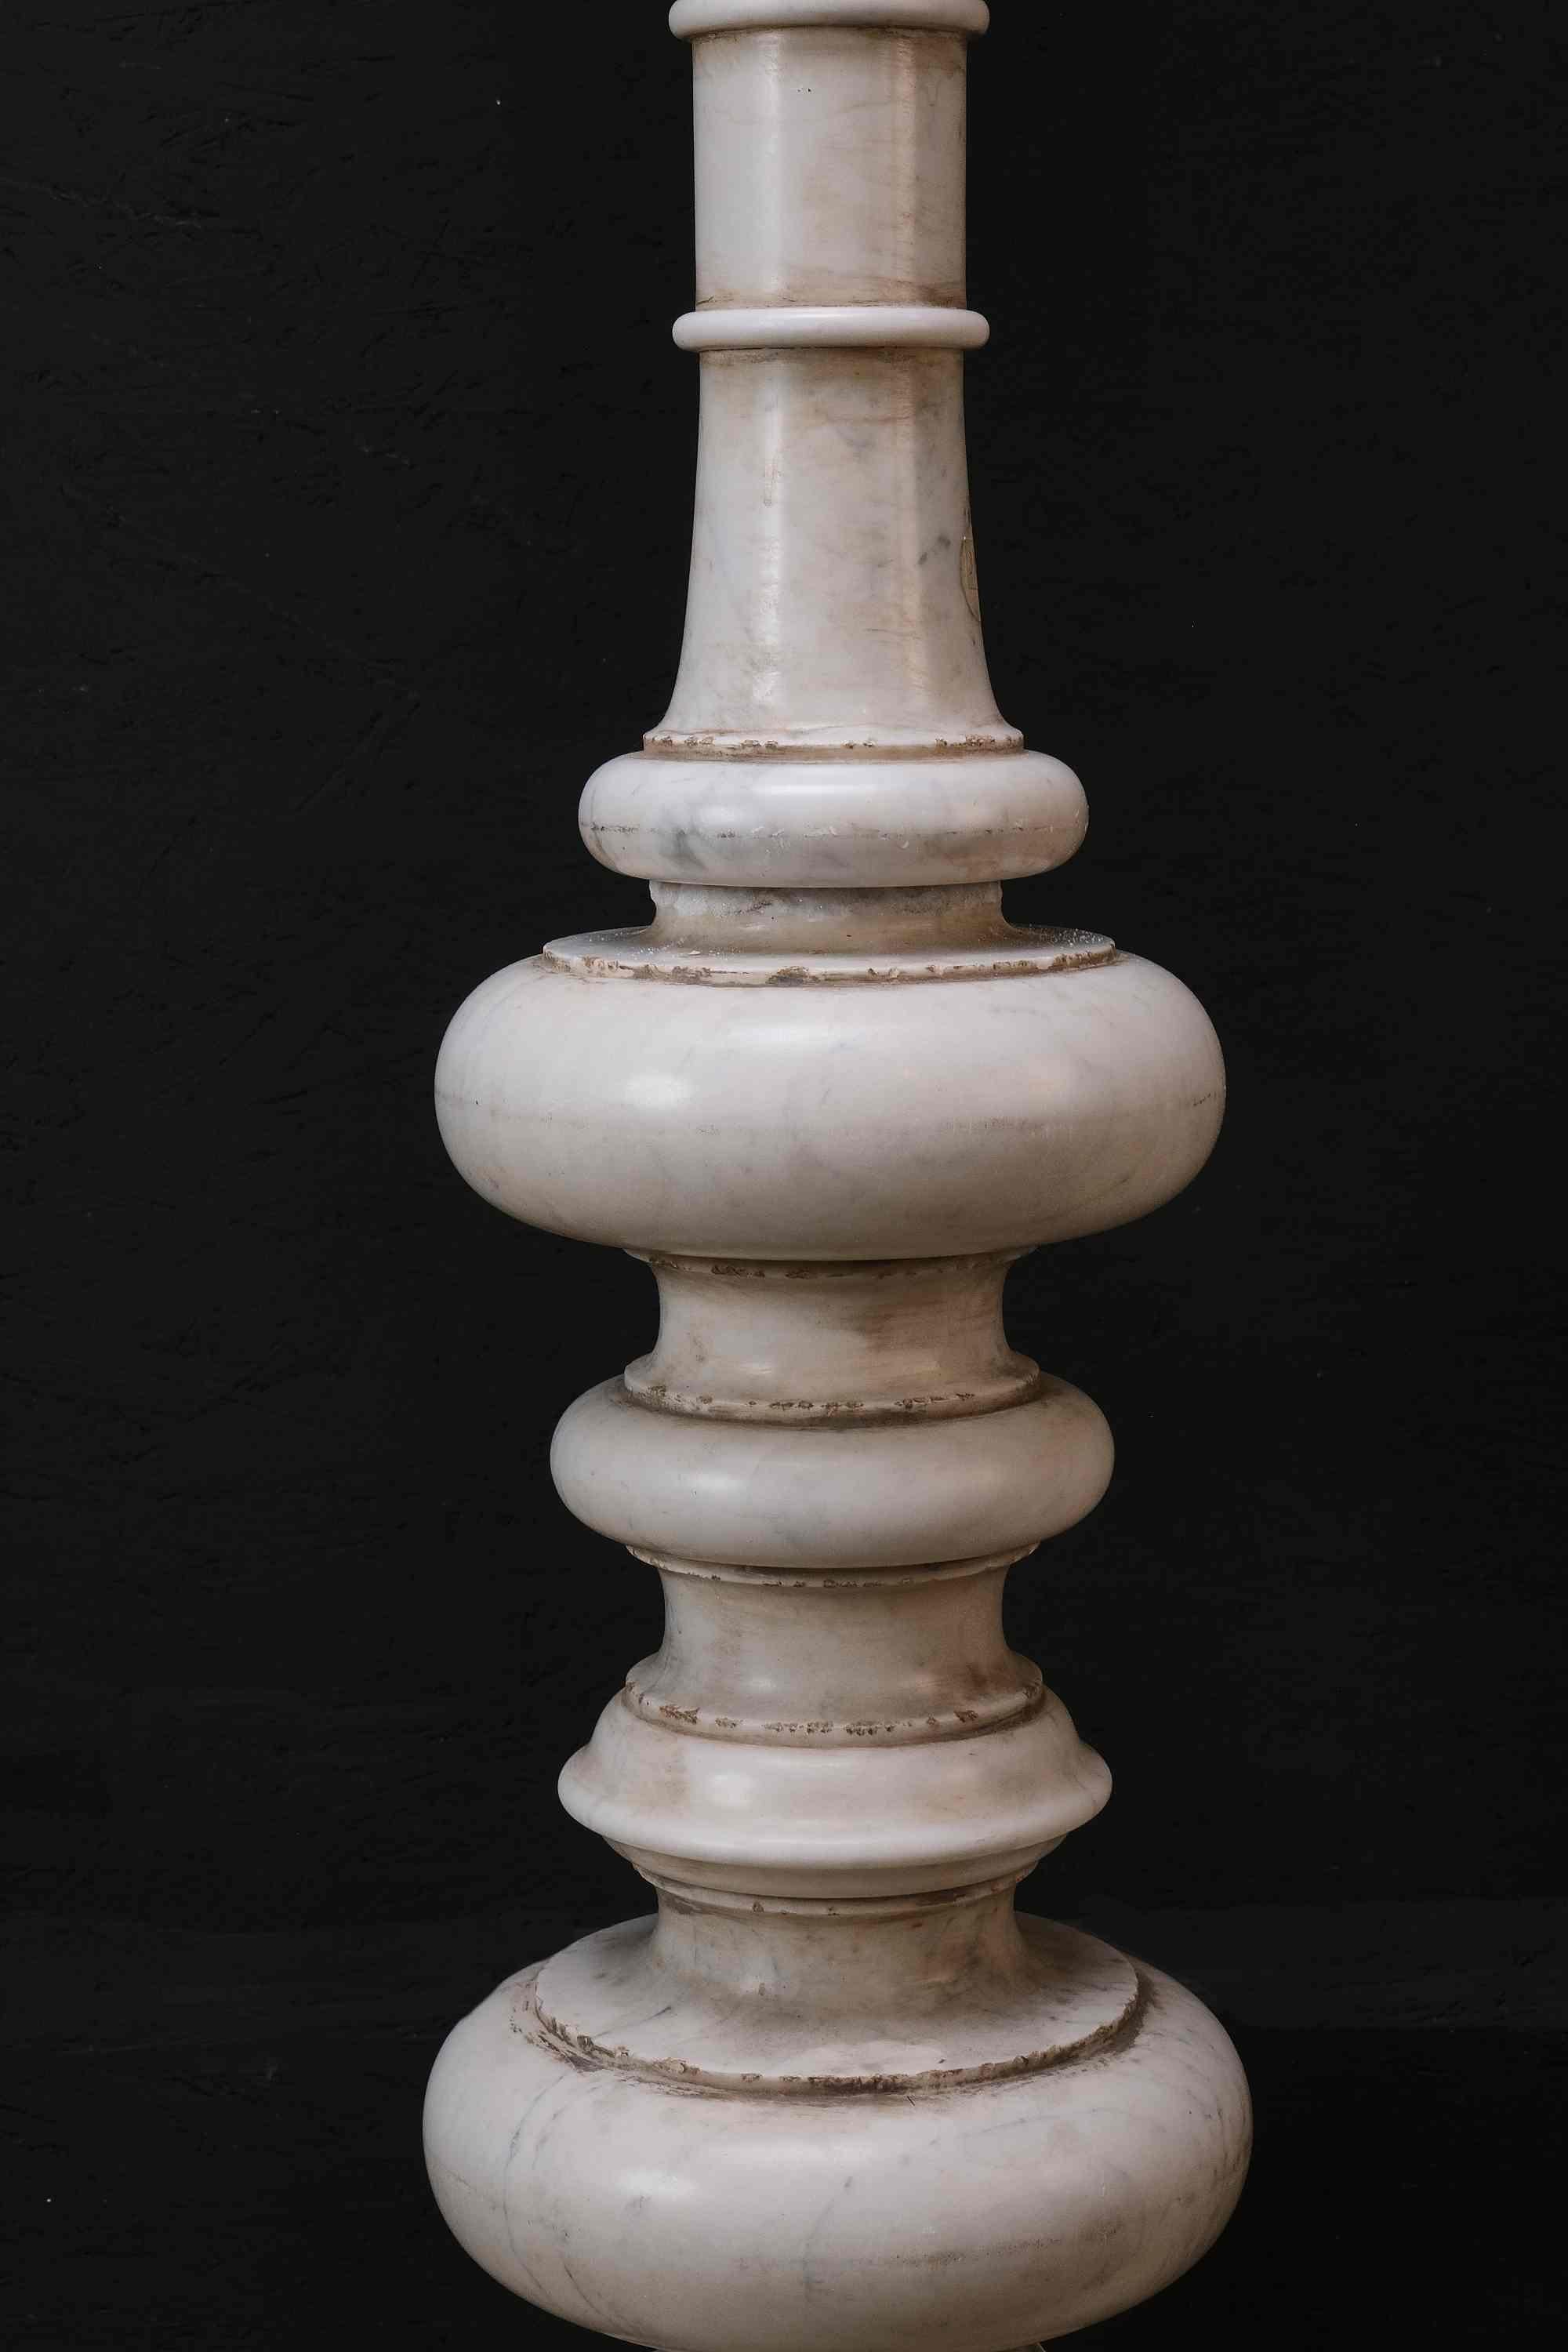 These monumental candlesticks are absolutely rare in this execution. They are divided into four segments in a multiple way and perfectly rotated. They are connected to each other by pivots. Each candlestick weighs approximately 100 kg. HD Pictures